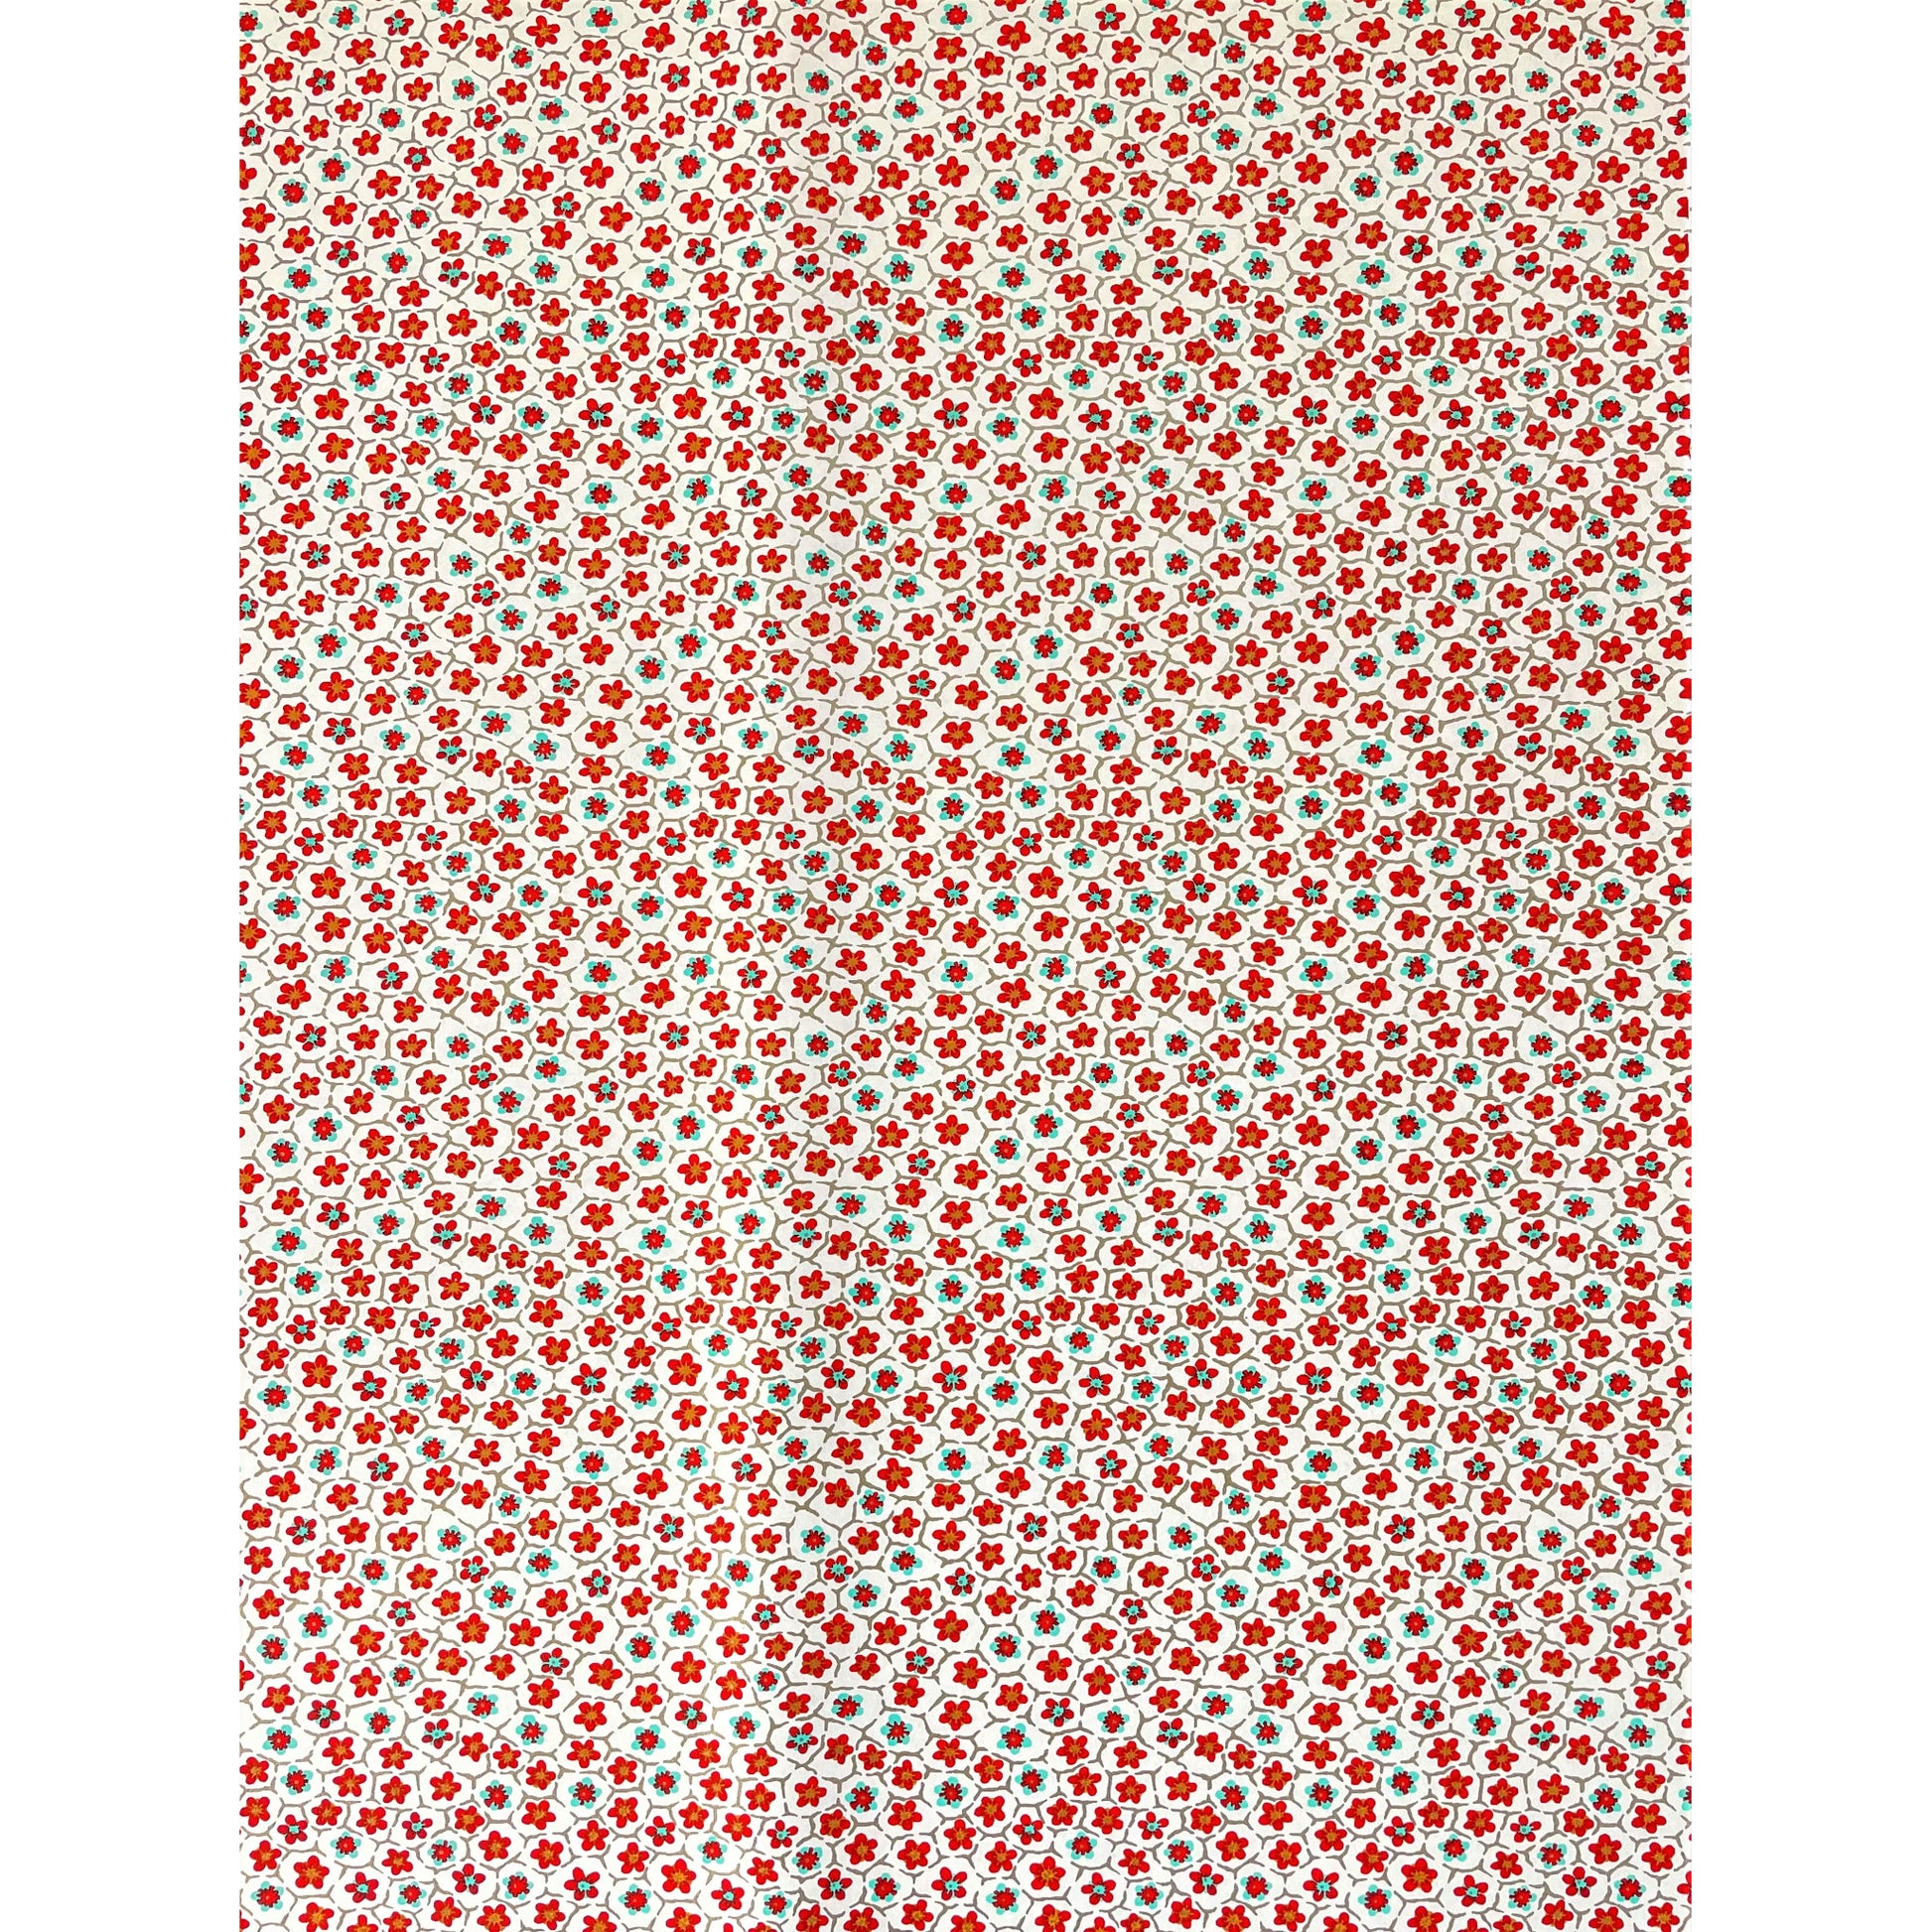 japanese silk-screen handmade paper with red and aqua plum flowers repeat pattern, full sheet view